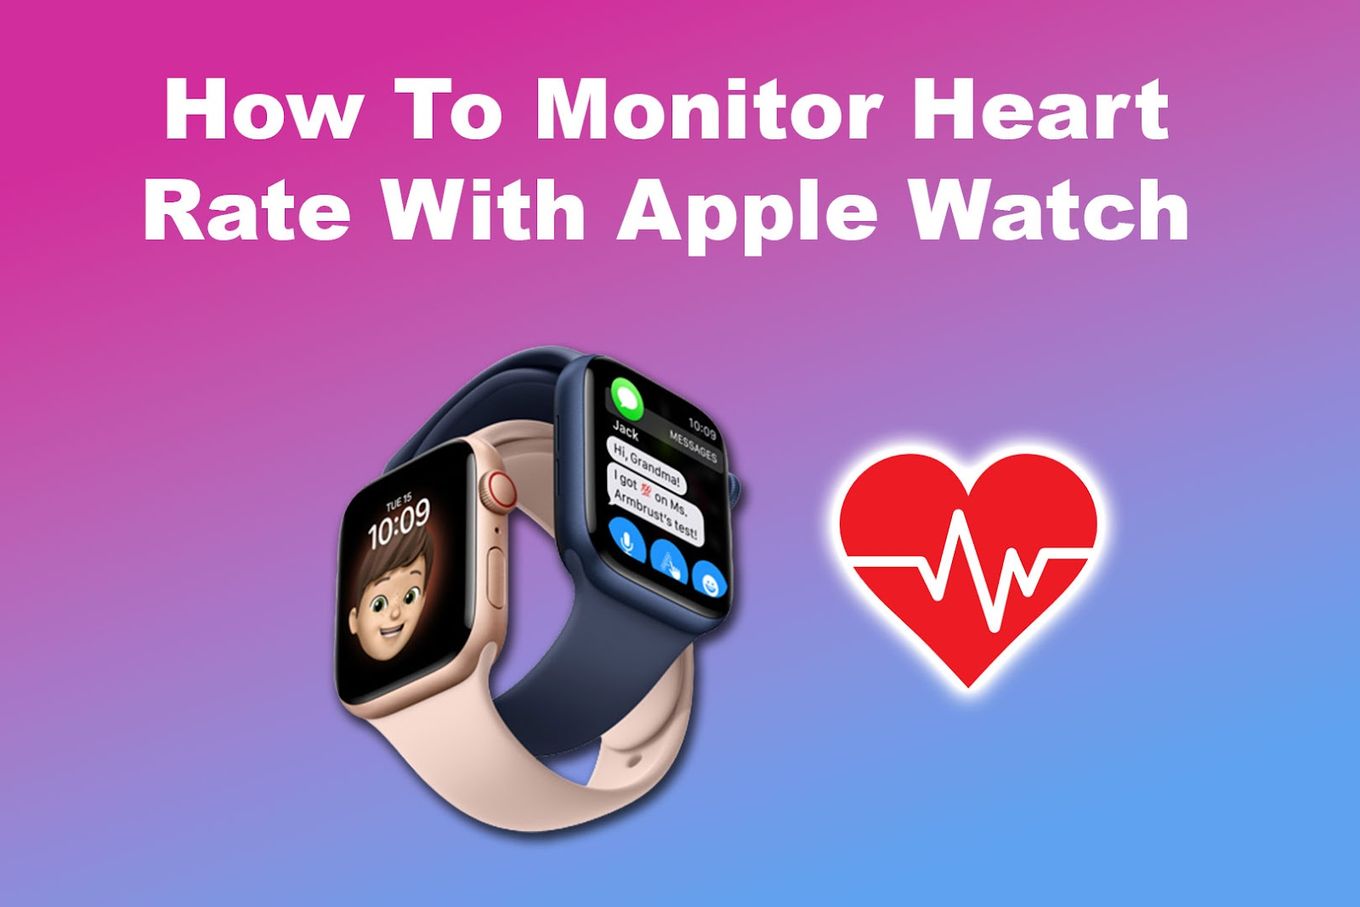 How To Monitor Heart Rate With Apple Watch